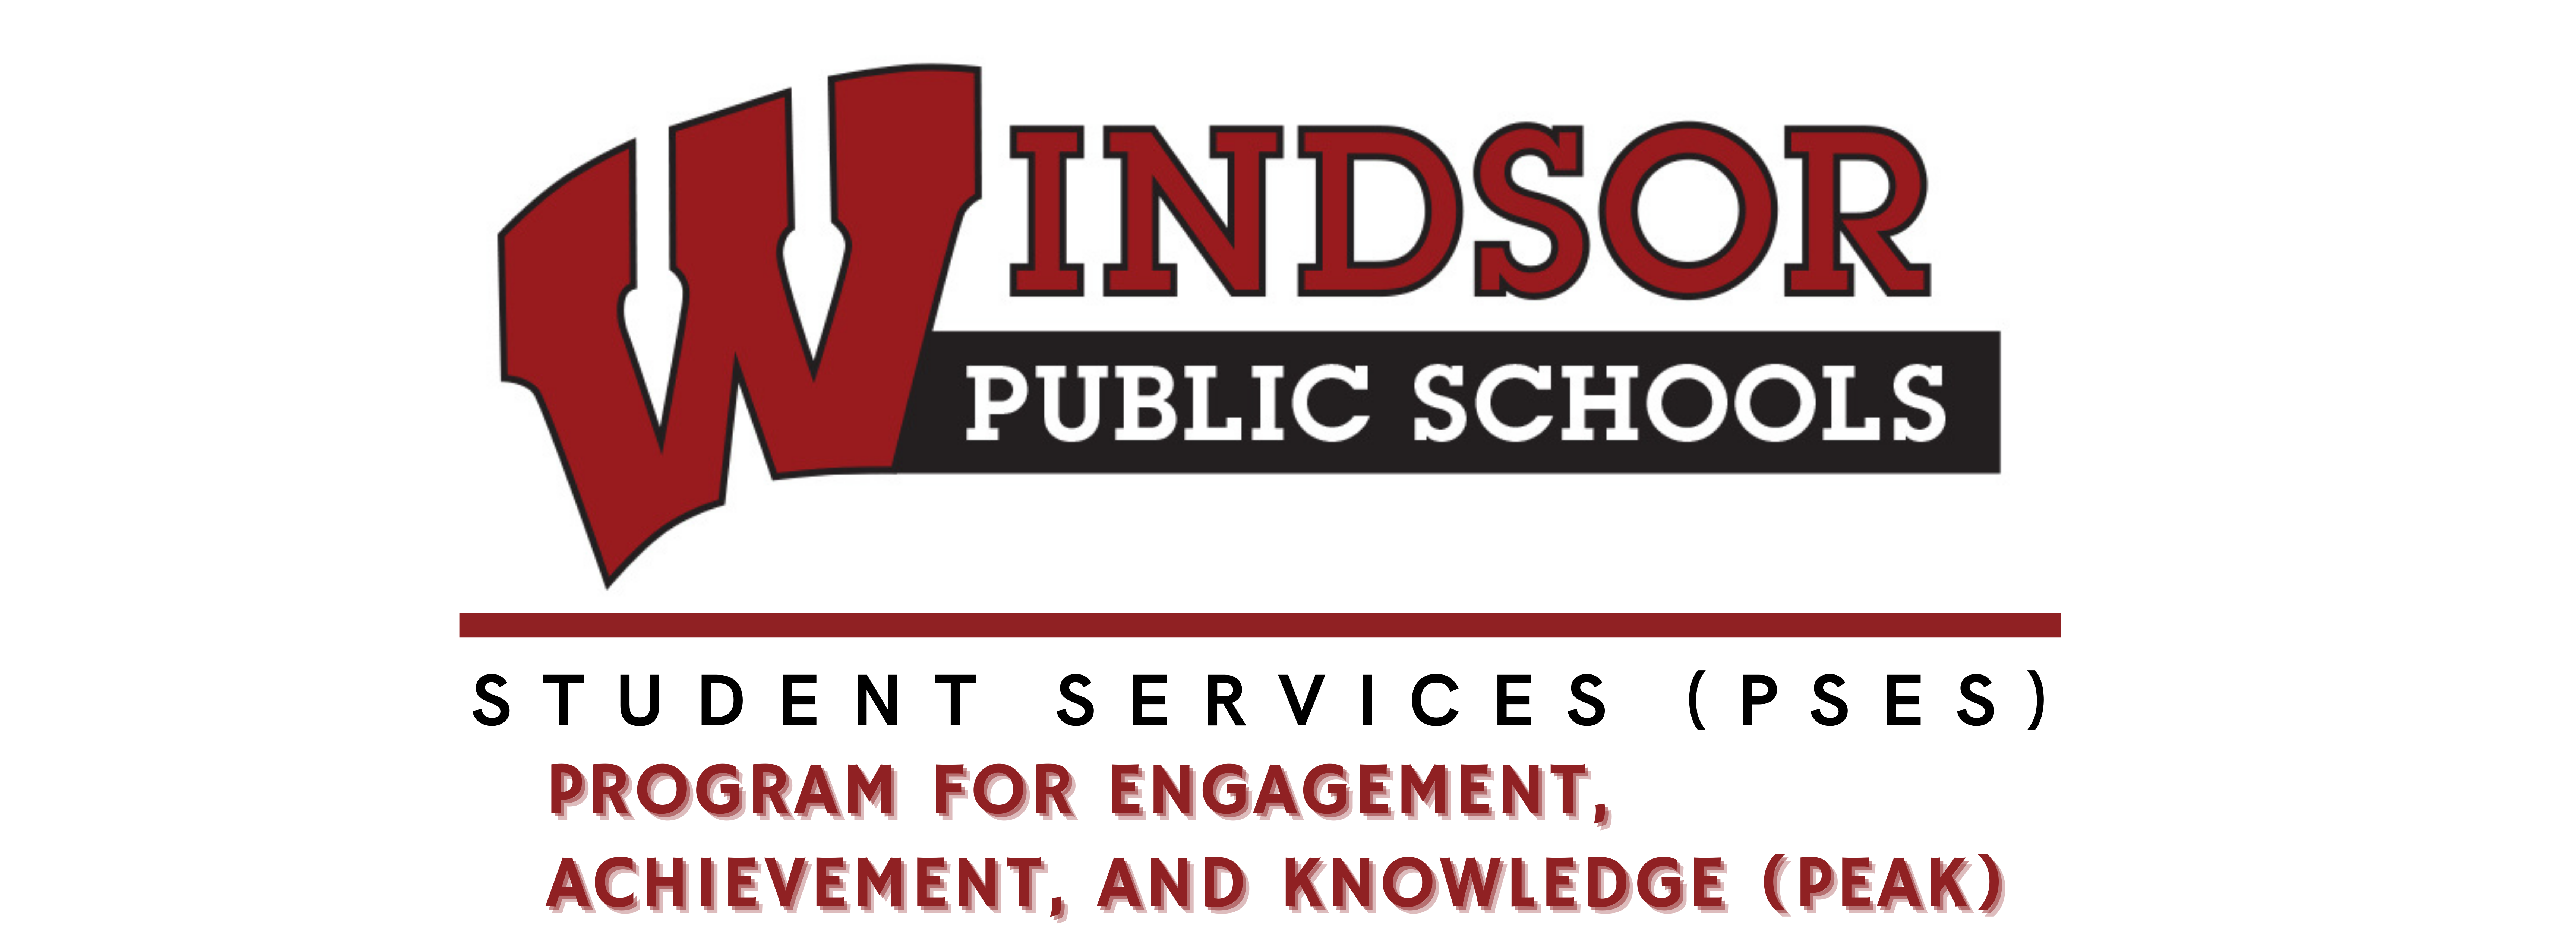 windsor public schools logo pupil and special education services Program for Engagement, Achievement, and Knowledge also known as PEAK